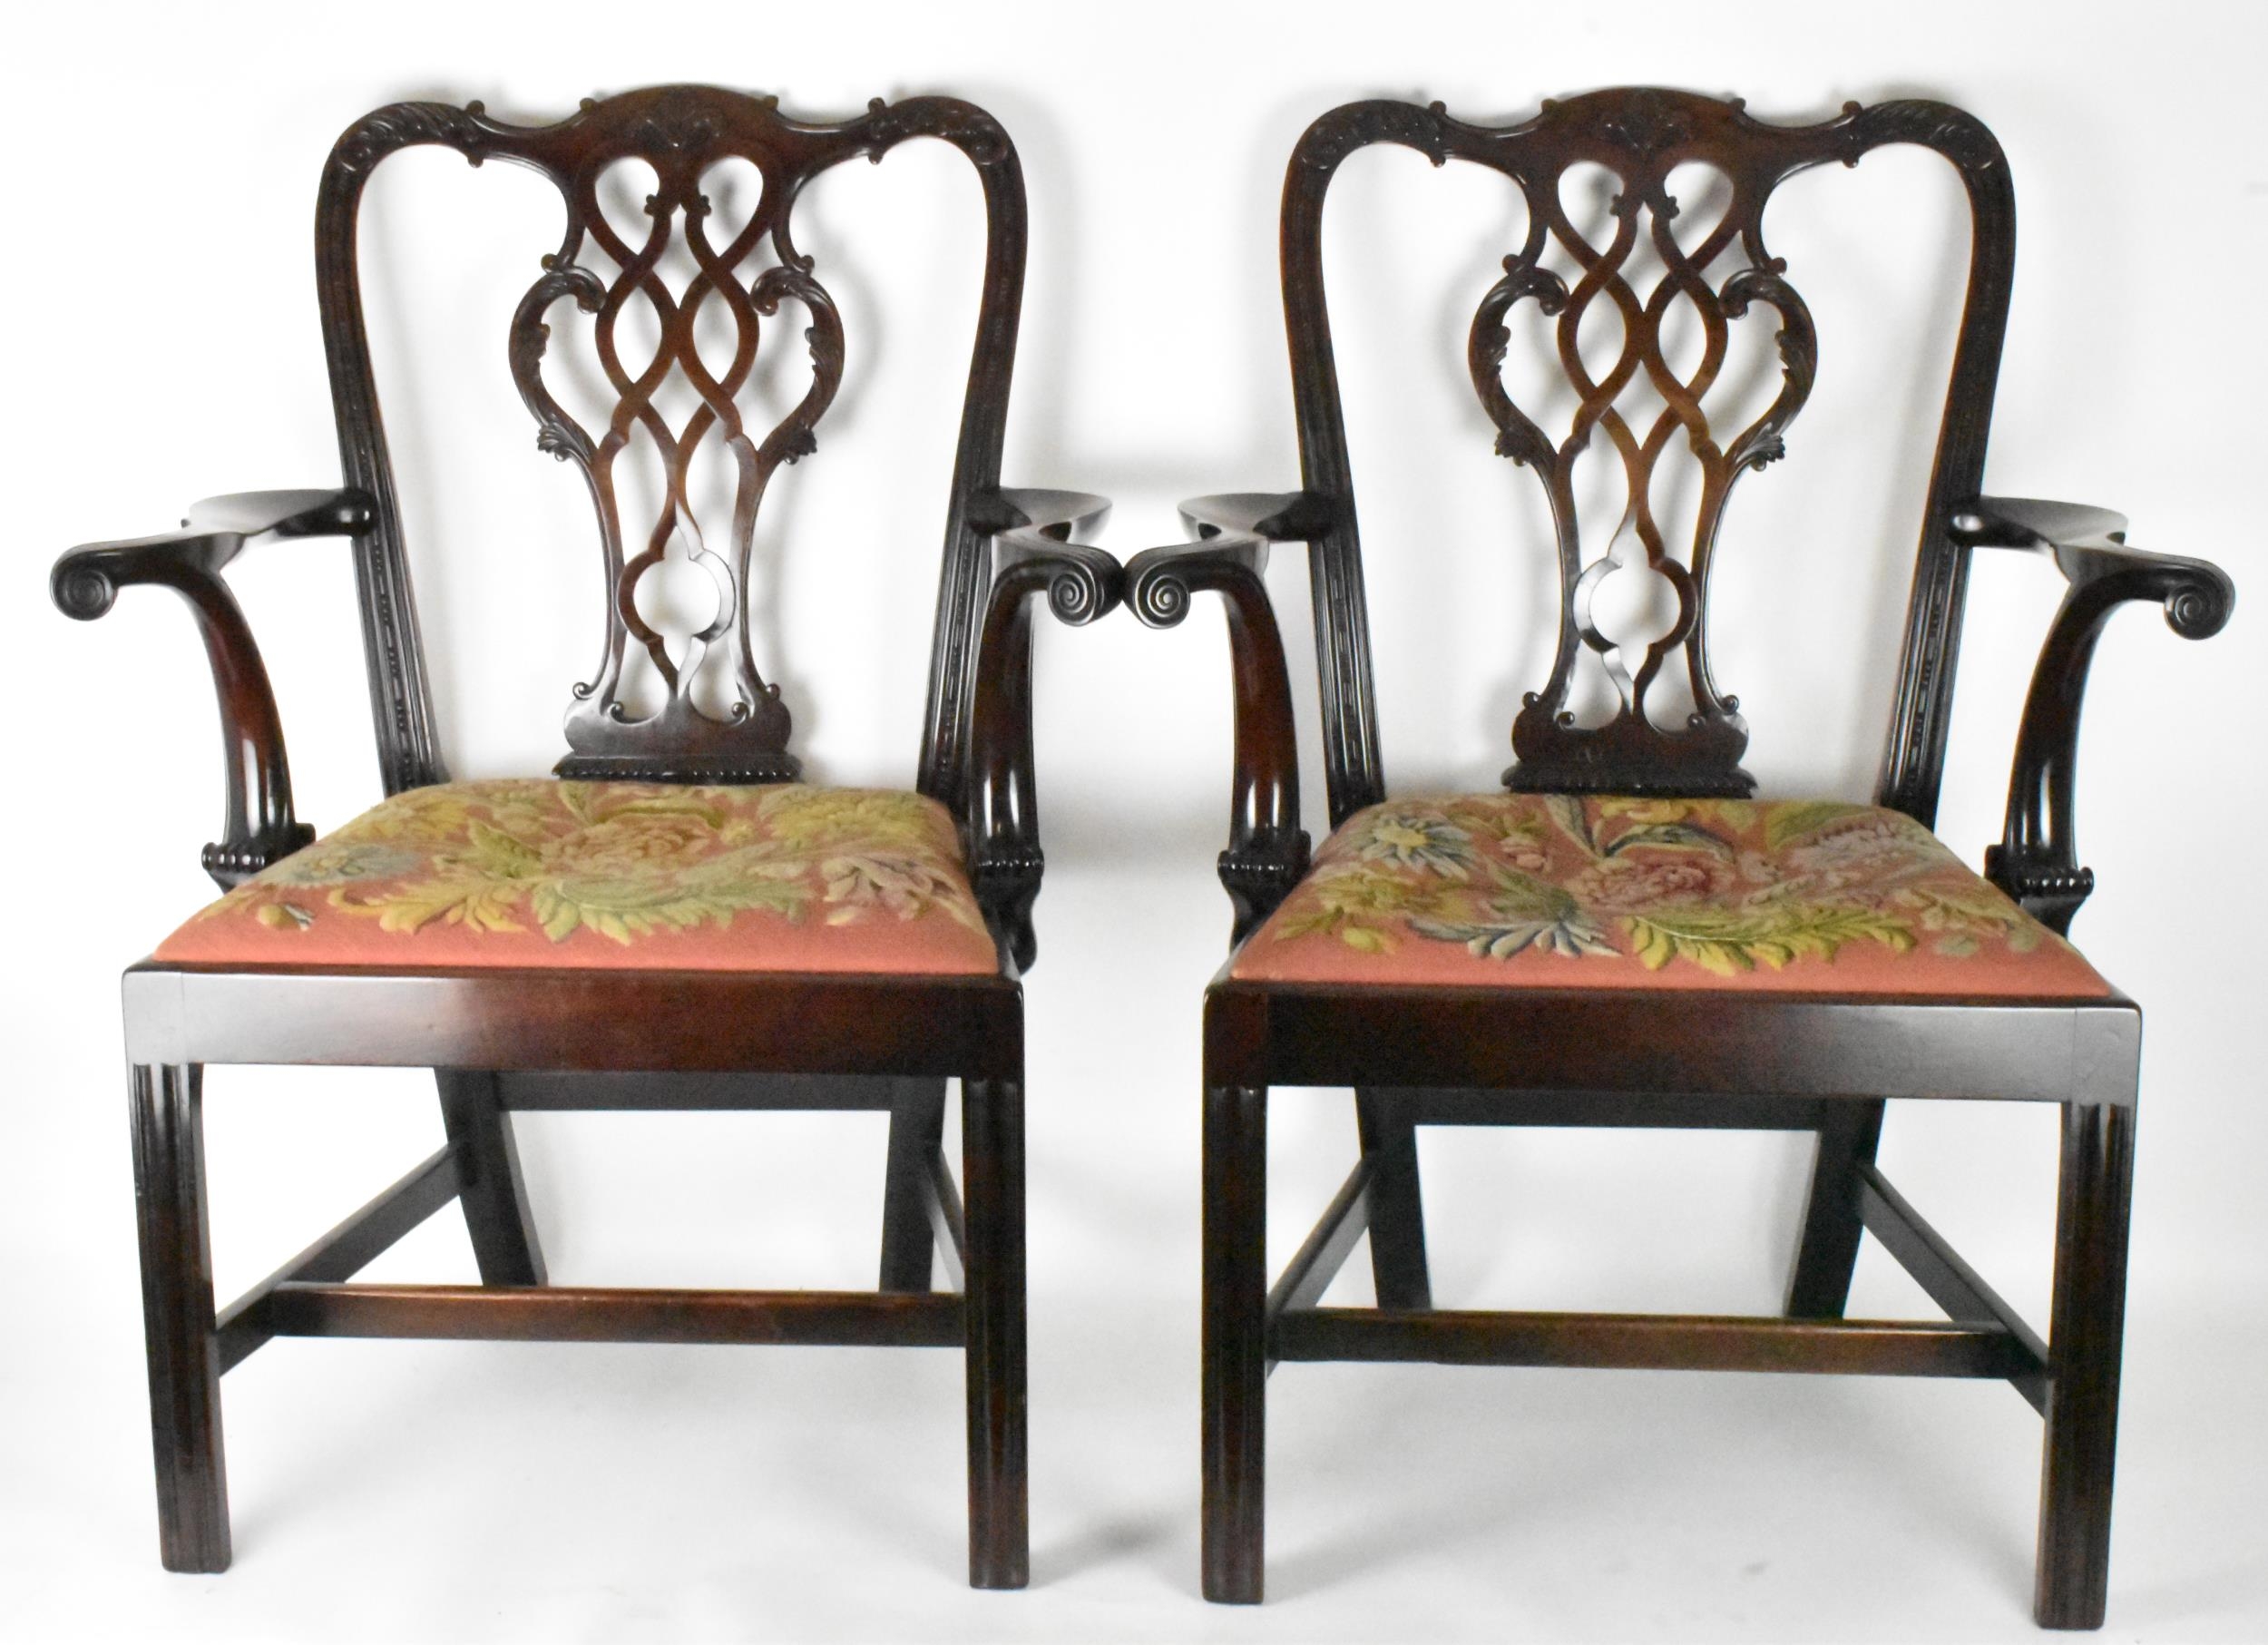 A pair of late 19th century mahogany Chippendale style carver chairs, carved with C scrolls, egg and